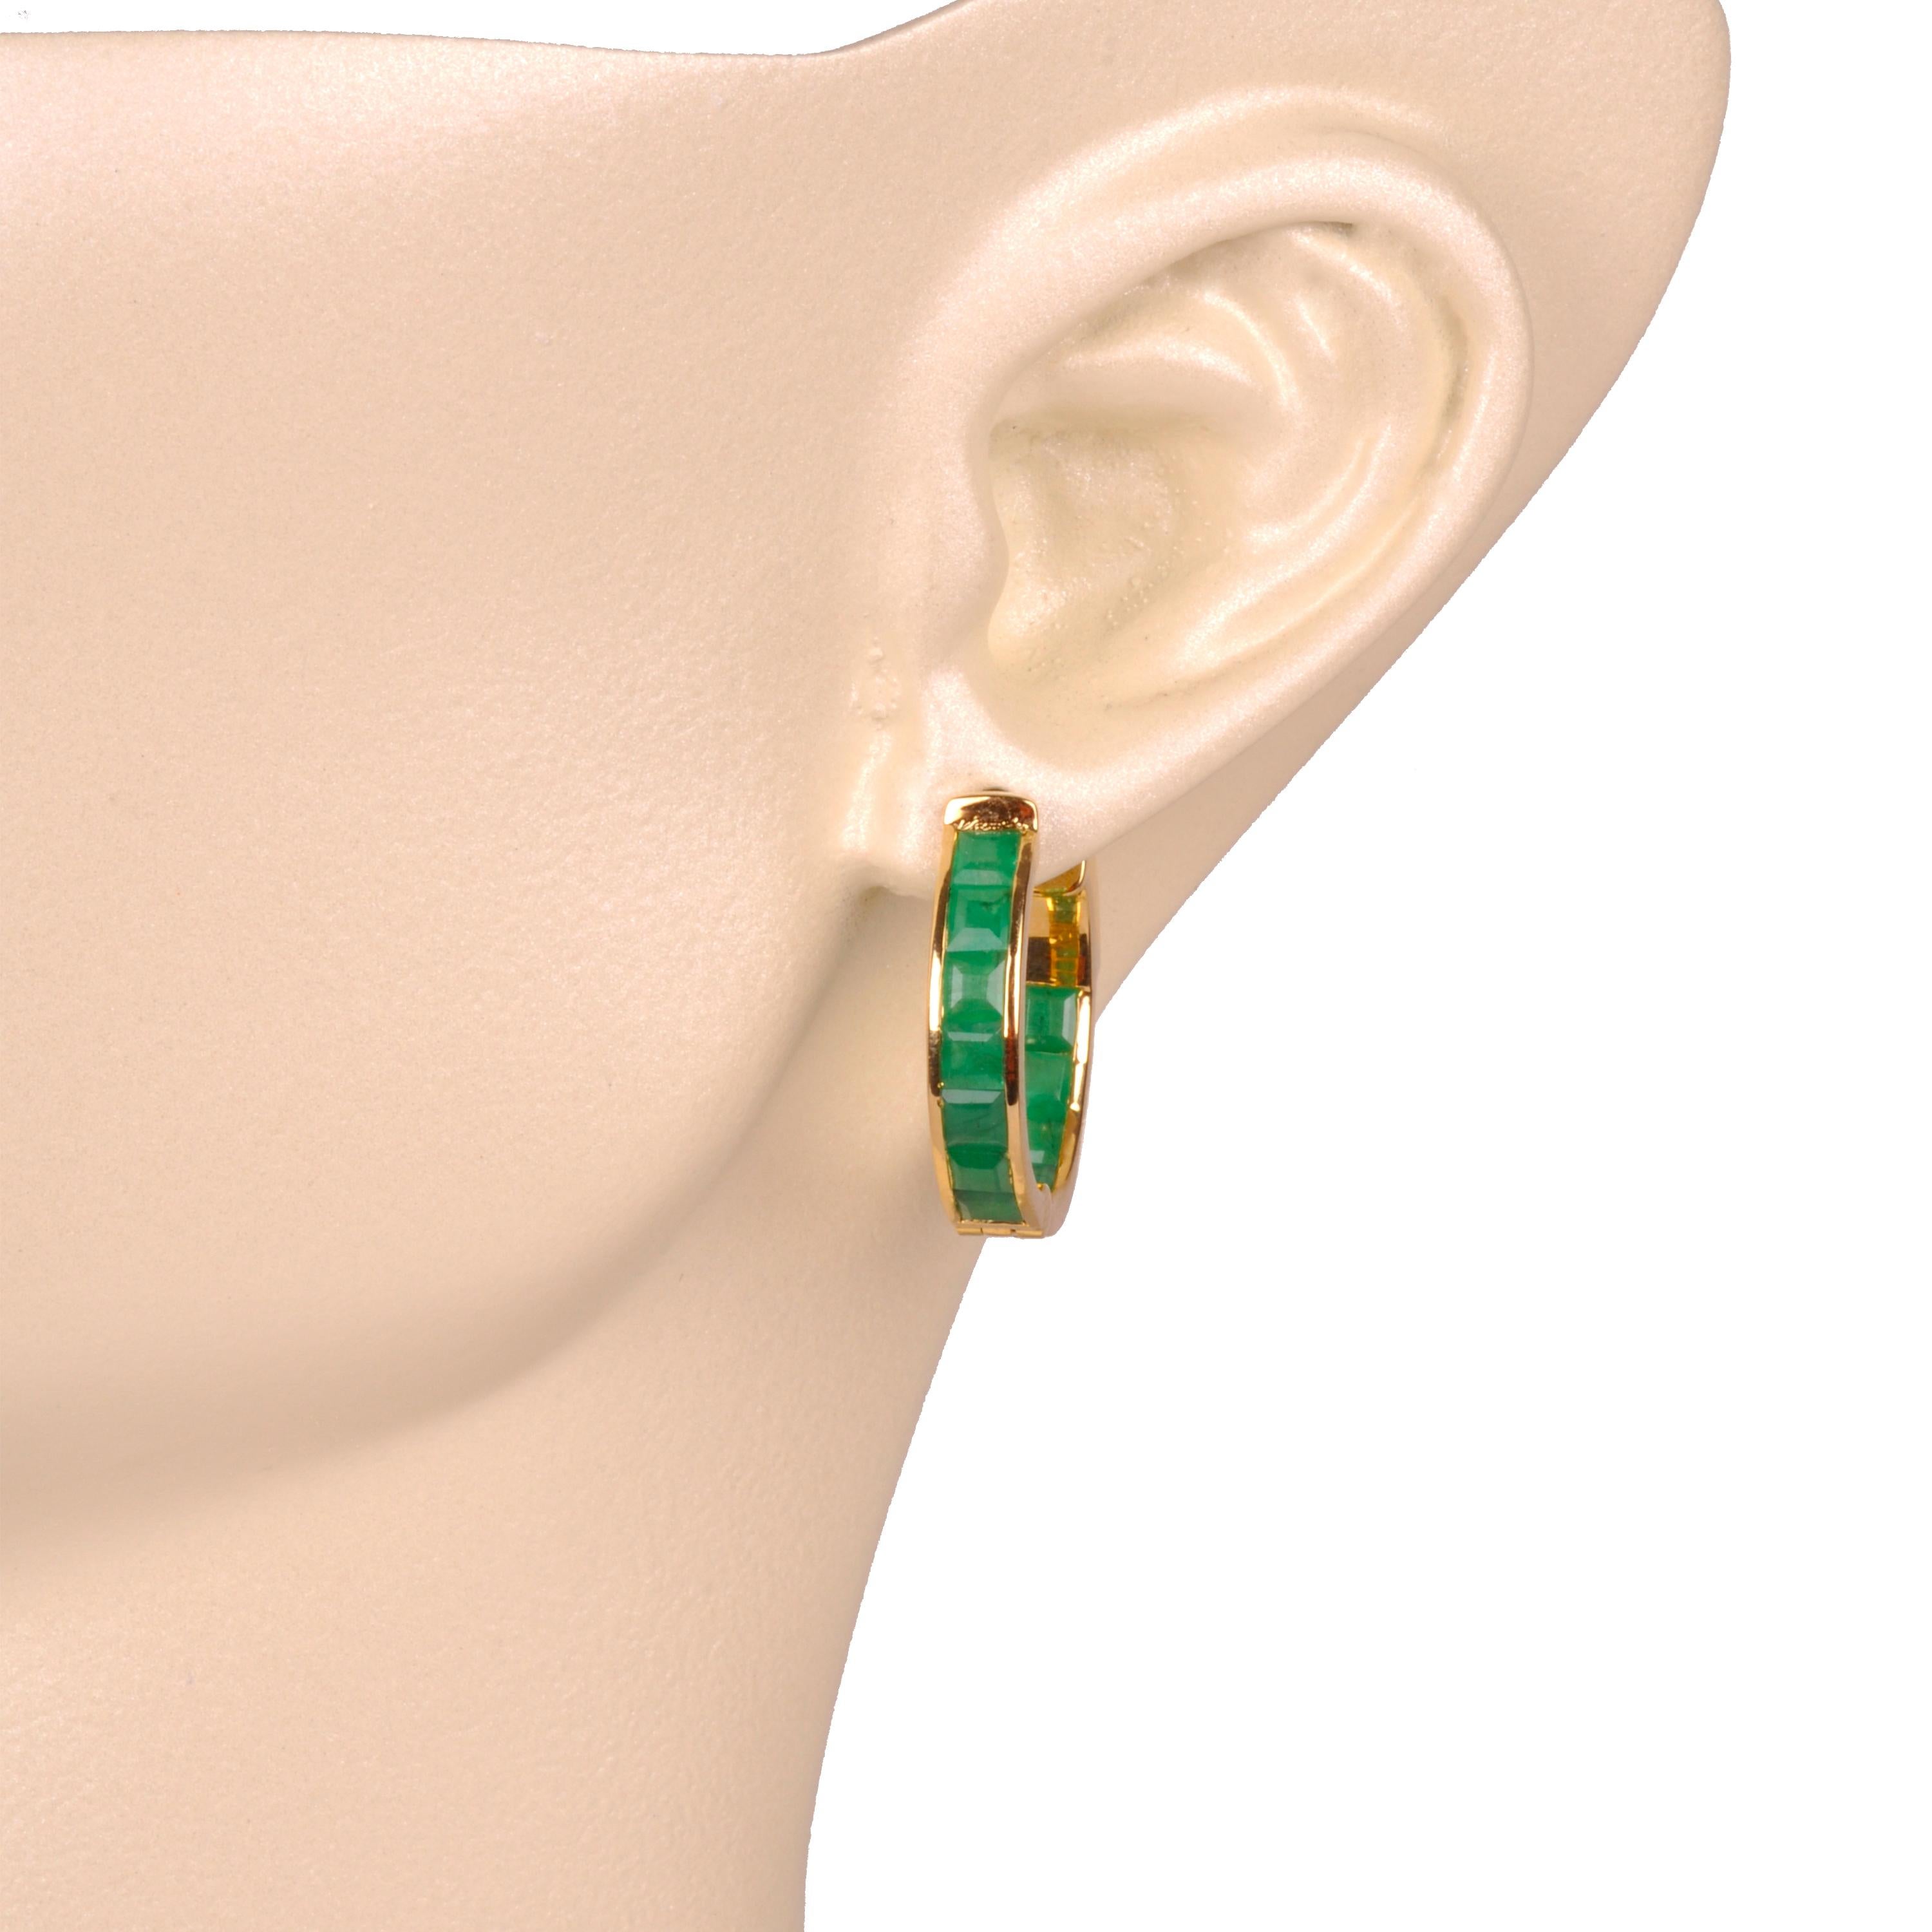 18 karat yellow gold 3mm square natural brazilian emerald hoops earrings.

Our Classic Emerald Hoop Earrings are a timeless blend of elegance and sophistication. Crafted with meticulous attention to detail, these exquisite earrings exude a